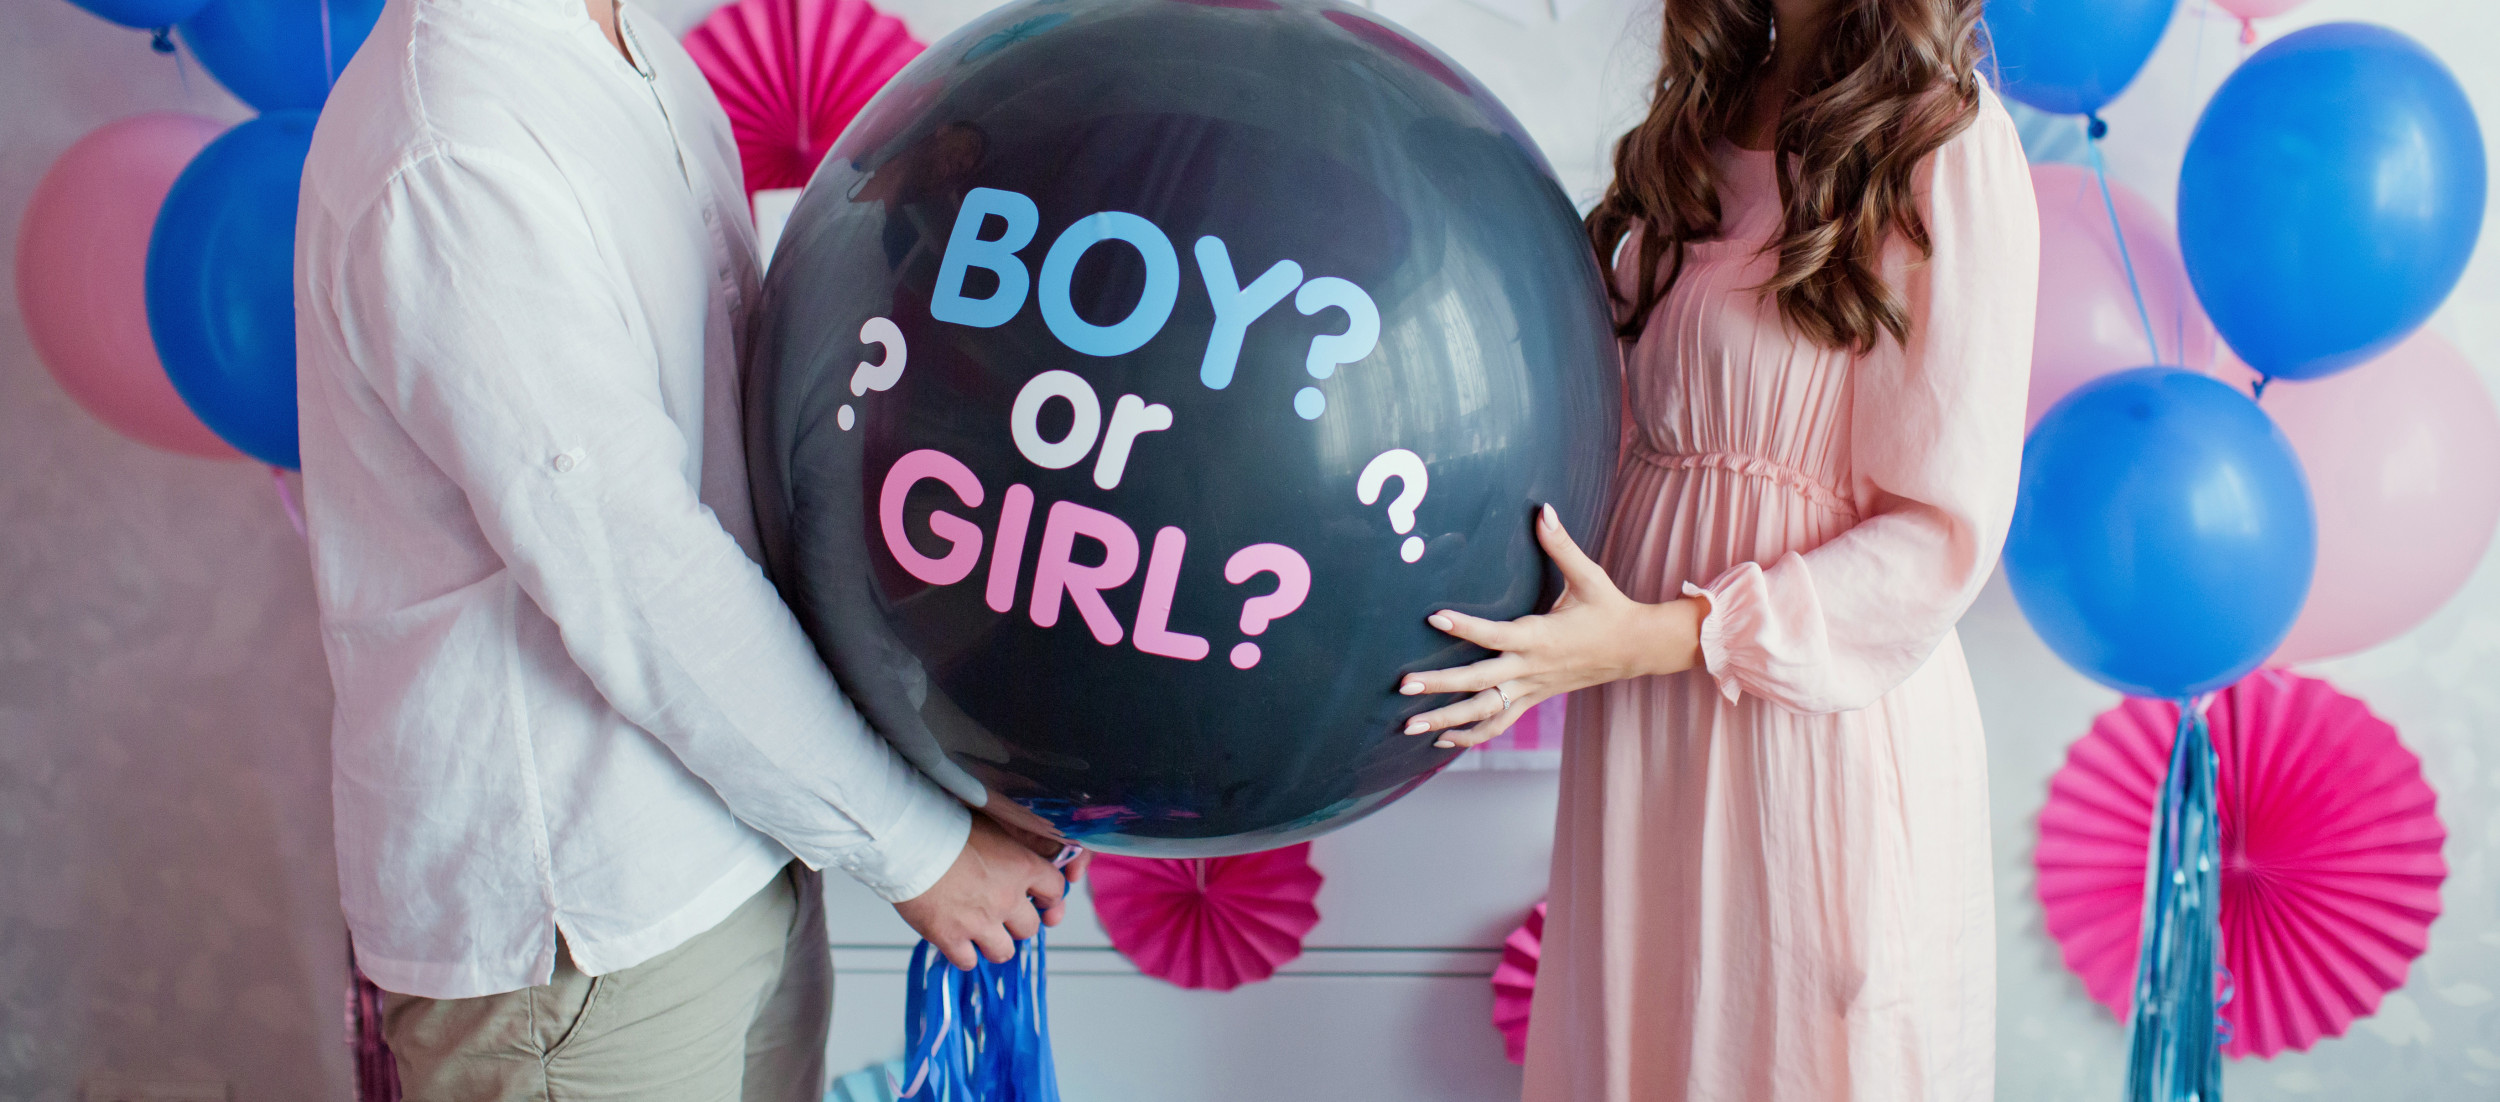 Woman Shares Gender Reveal Fail In Viral Video That Looks Intentional